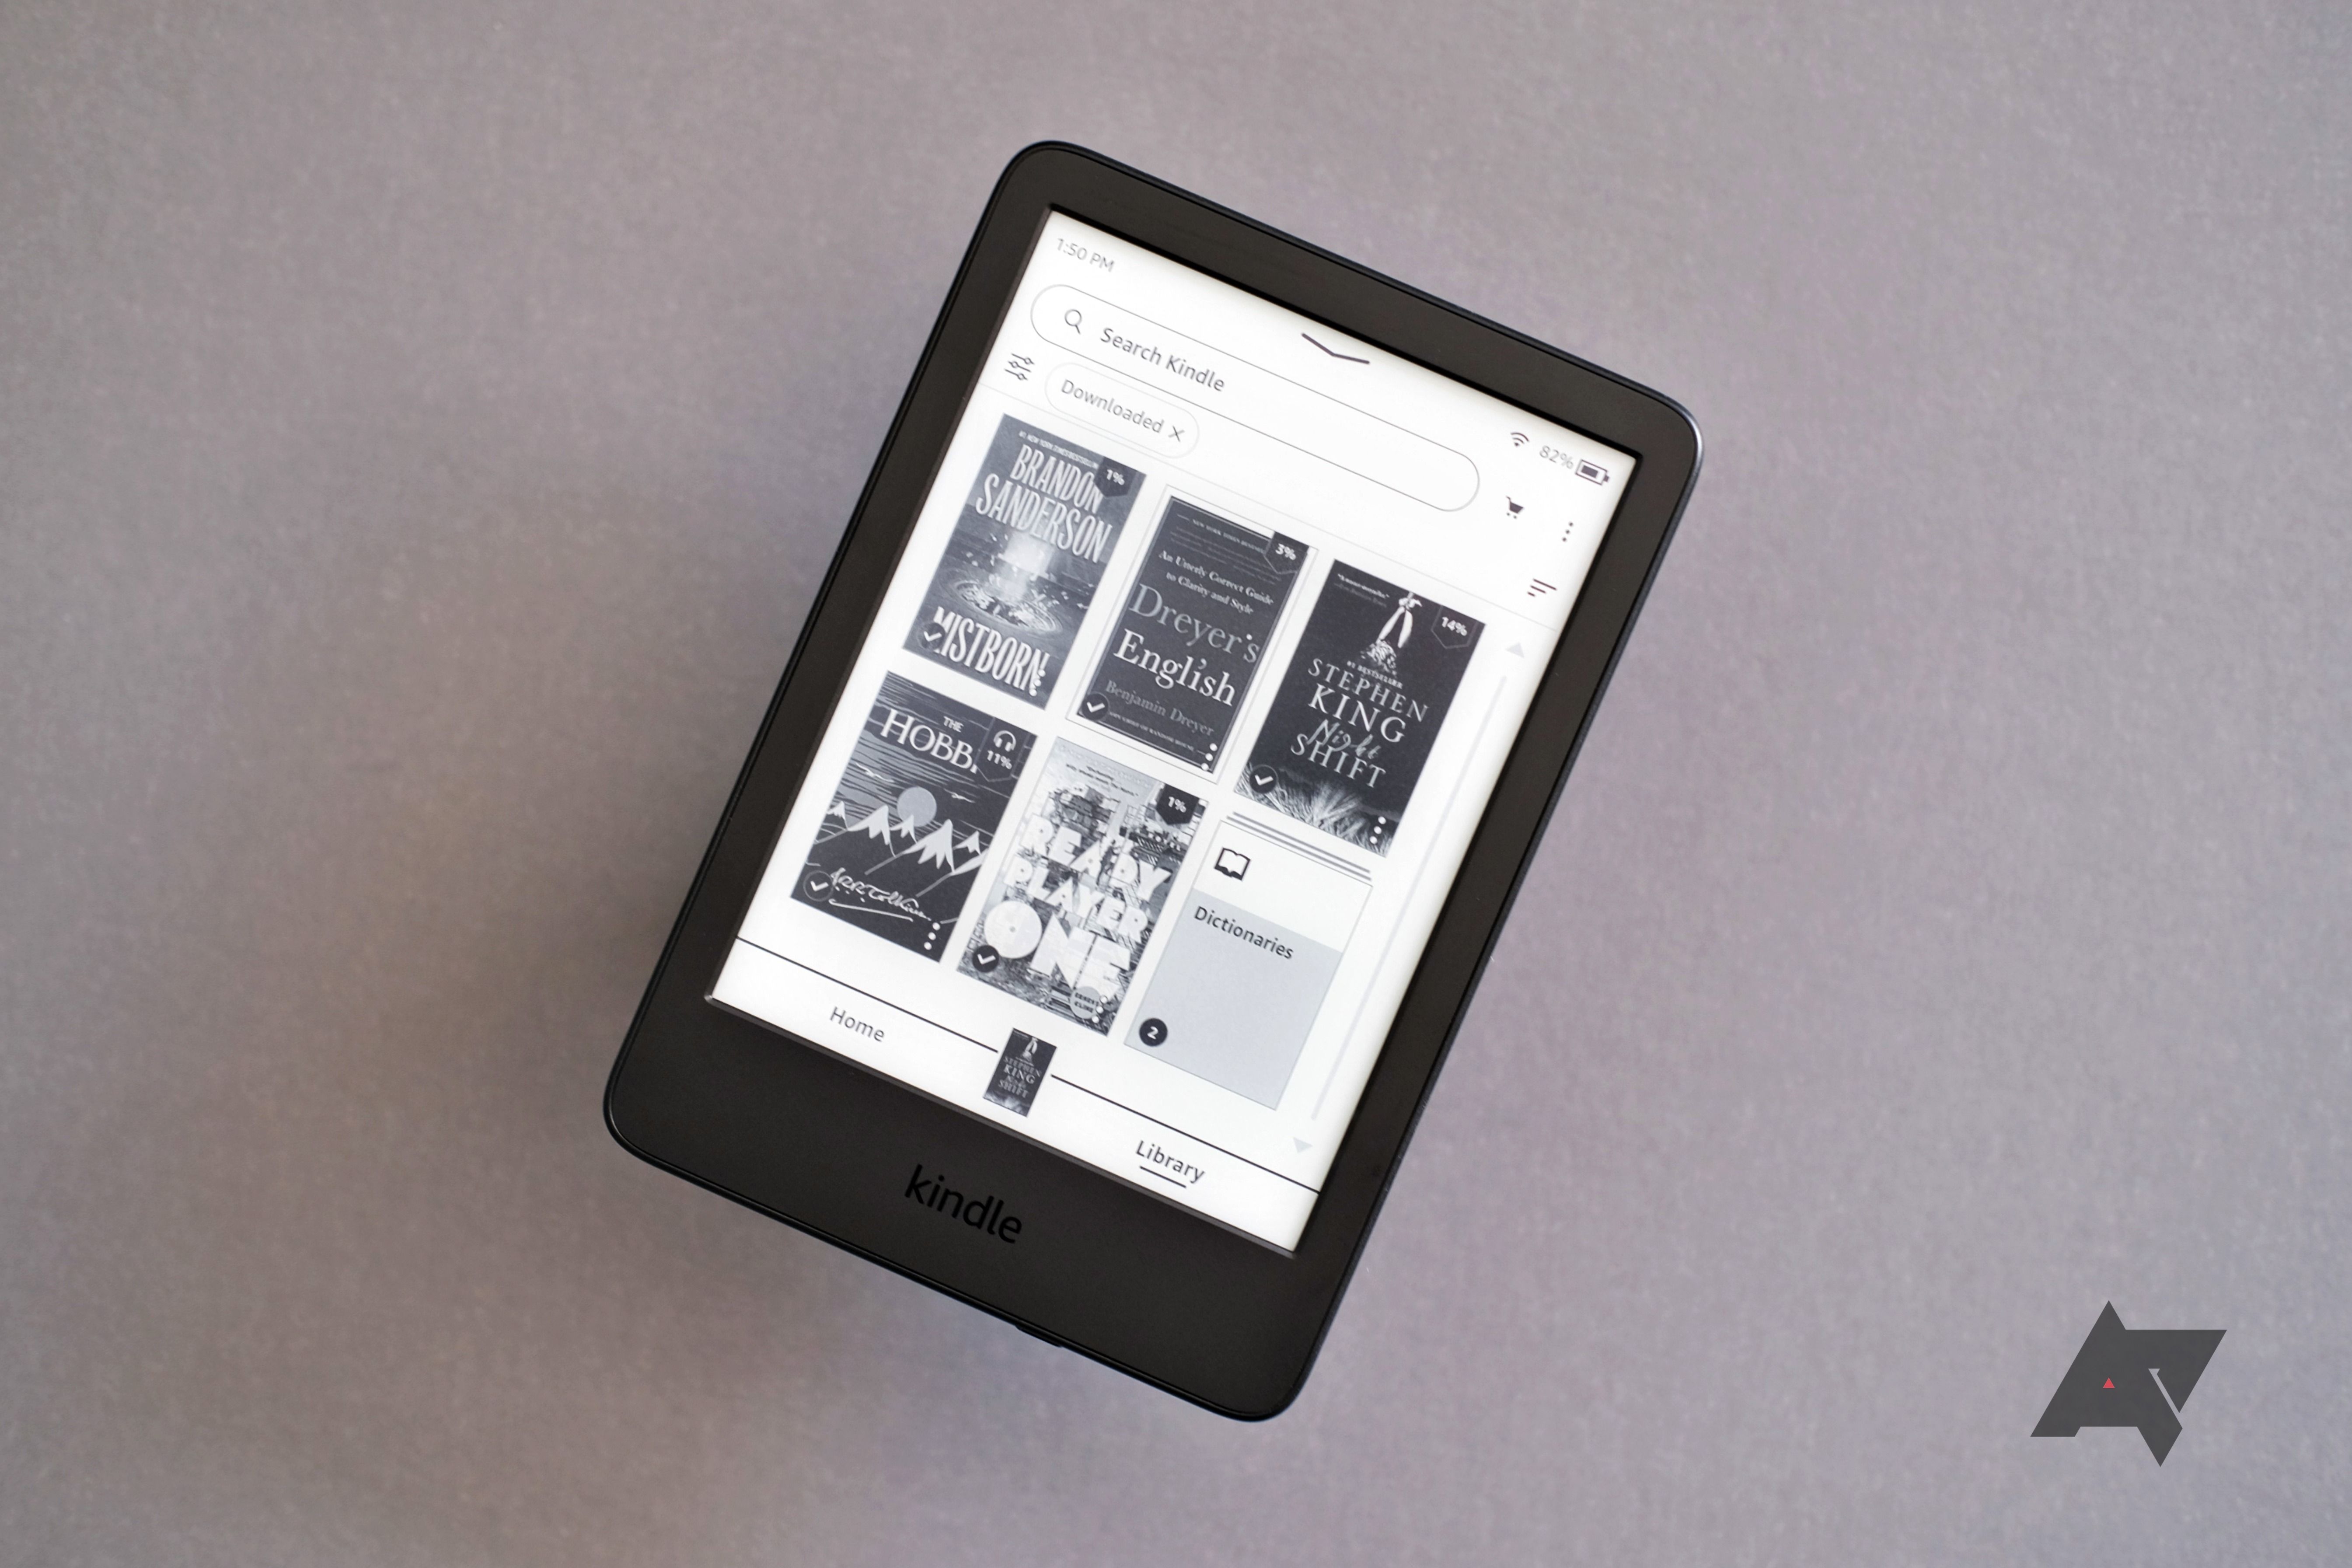   Kindle – The lightest and most compact Kindle